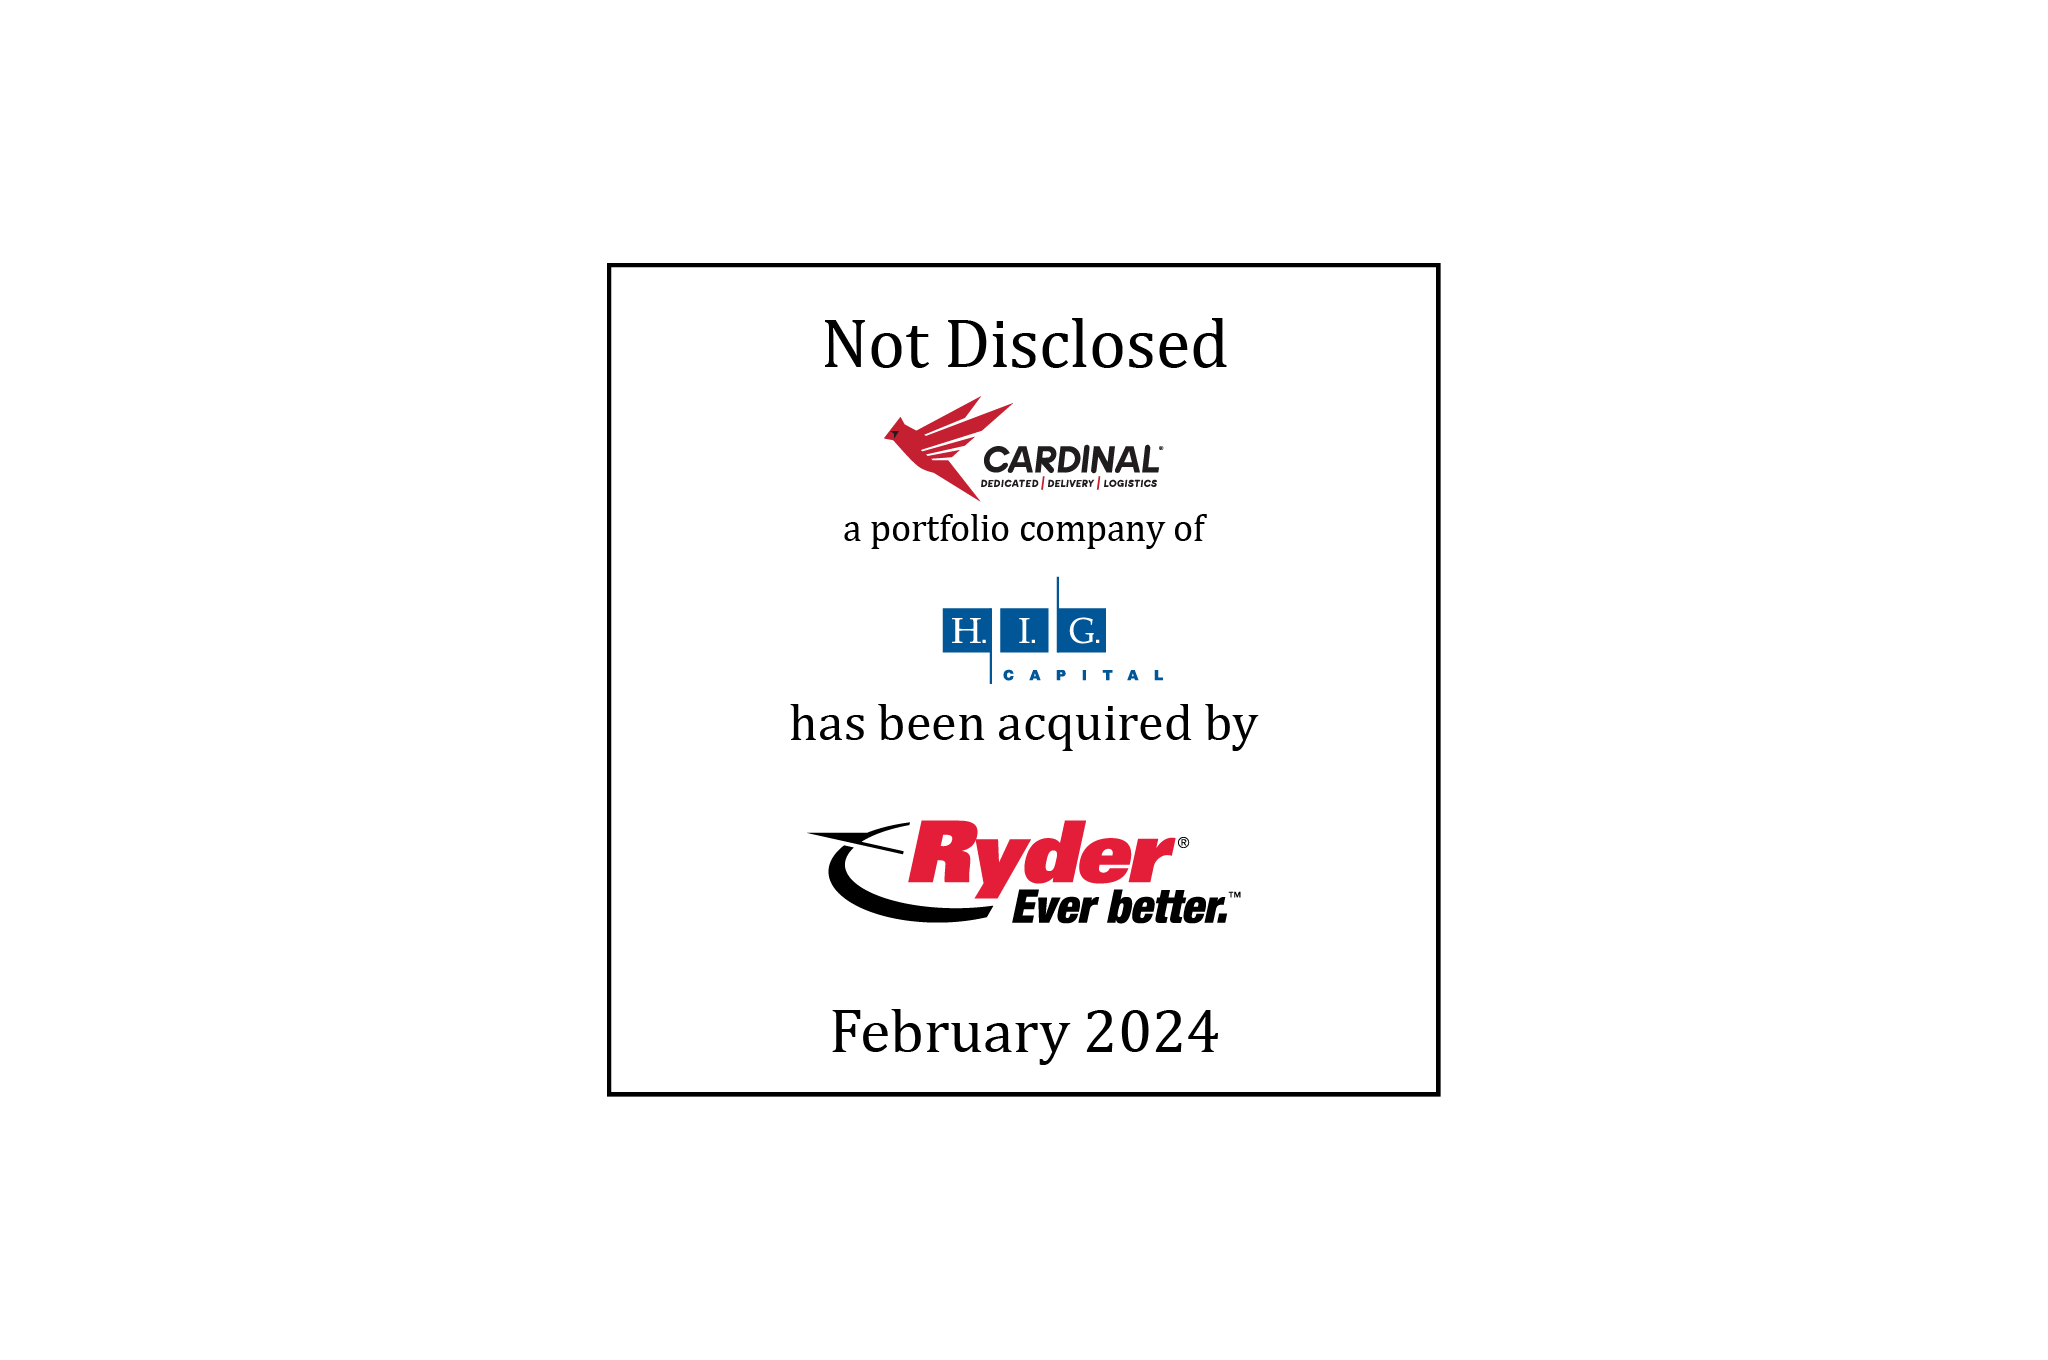 Not Disclosed | Cardinal Logistics (logo), a portfolio company of H.I.G. Capital (logo), has been acquired by Ryder System (logo) | February 2024